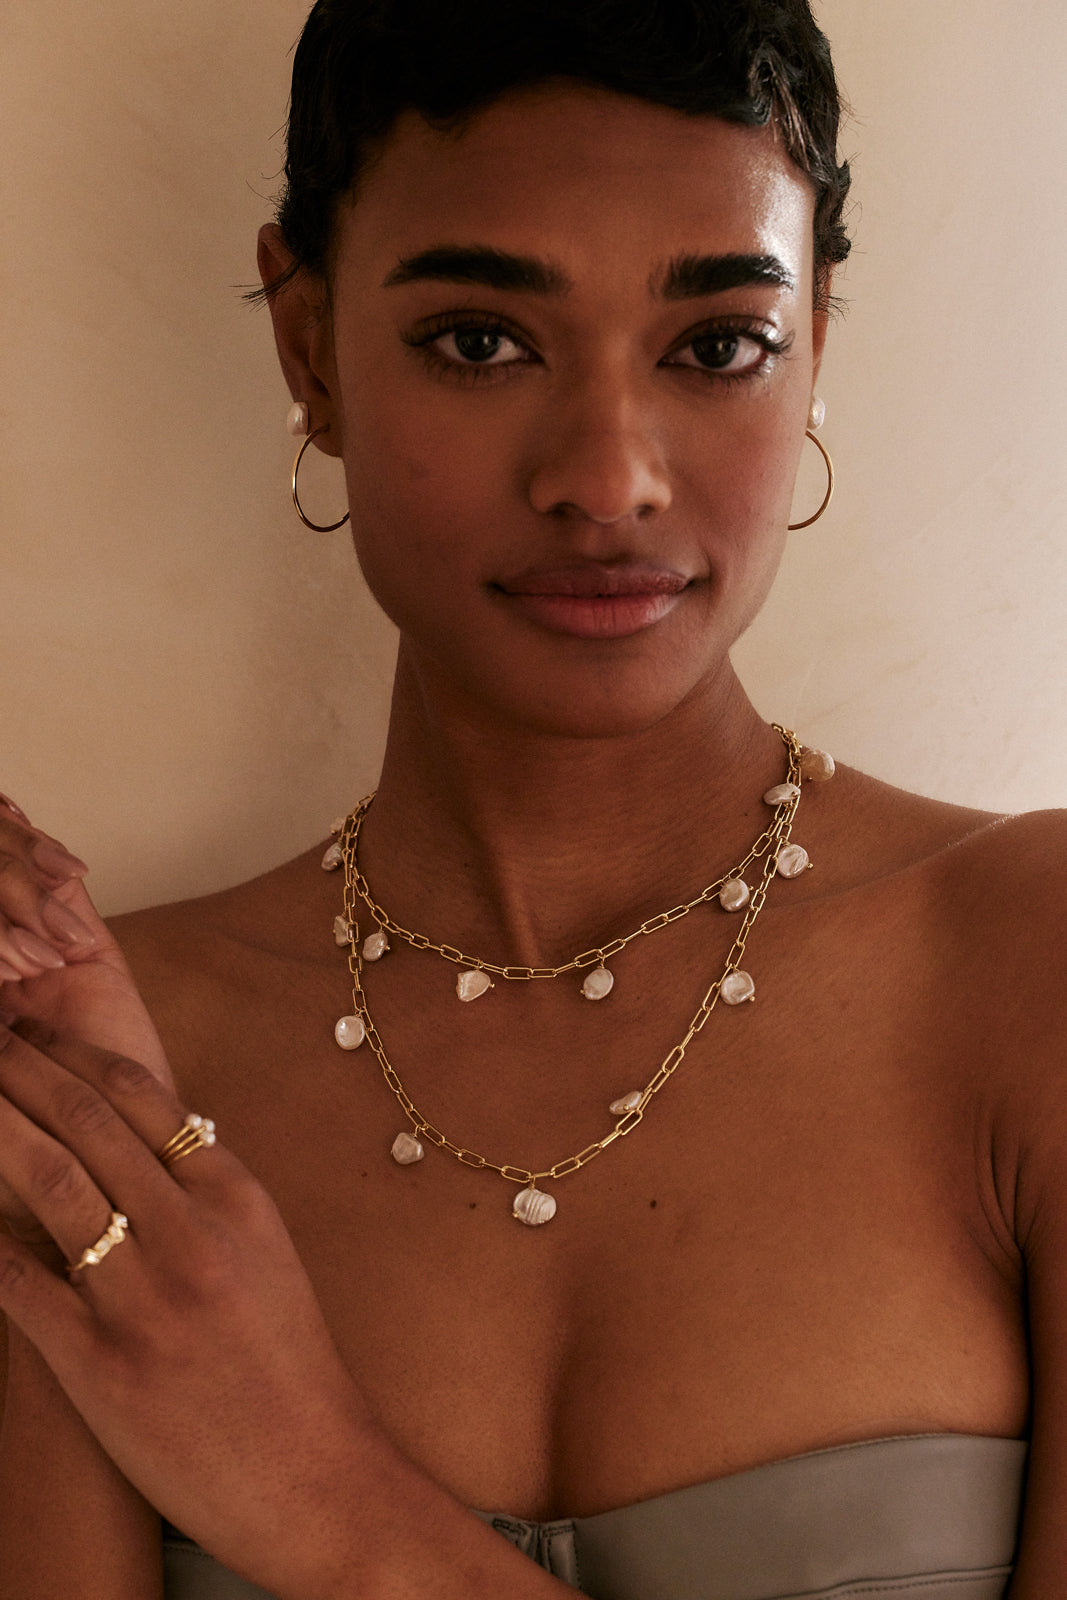 Model wearing grit look - Grit necklace, choker and rings